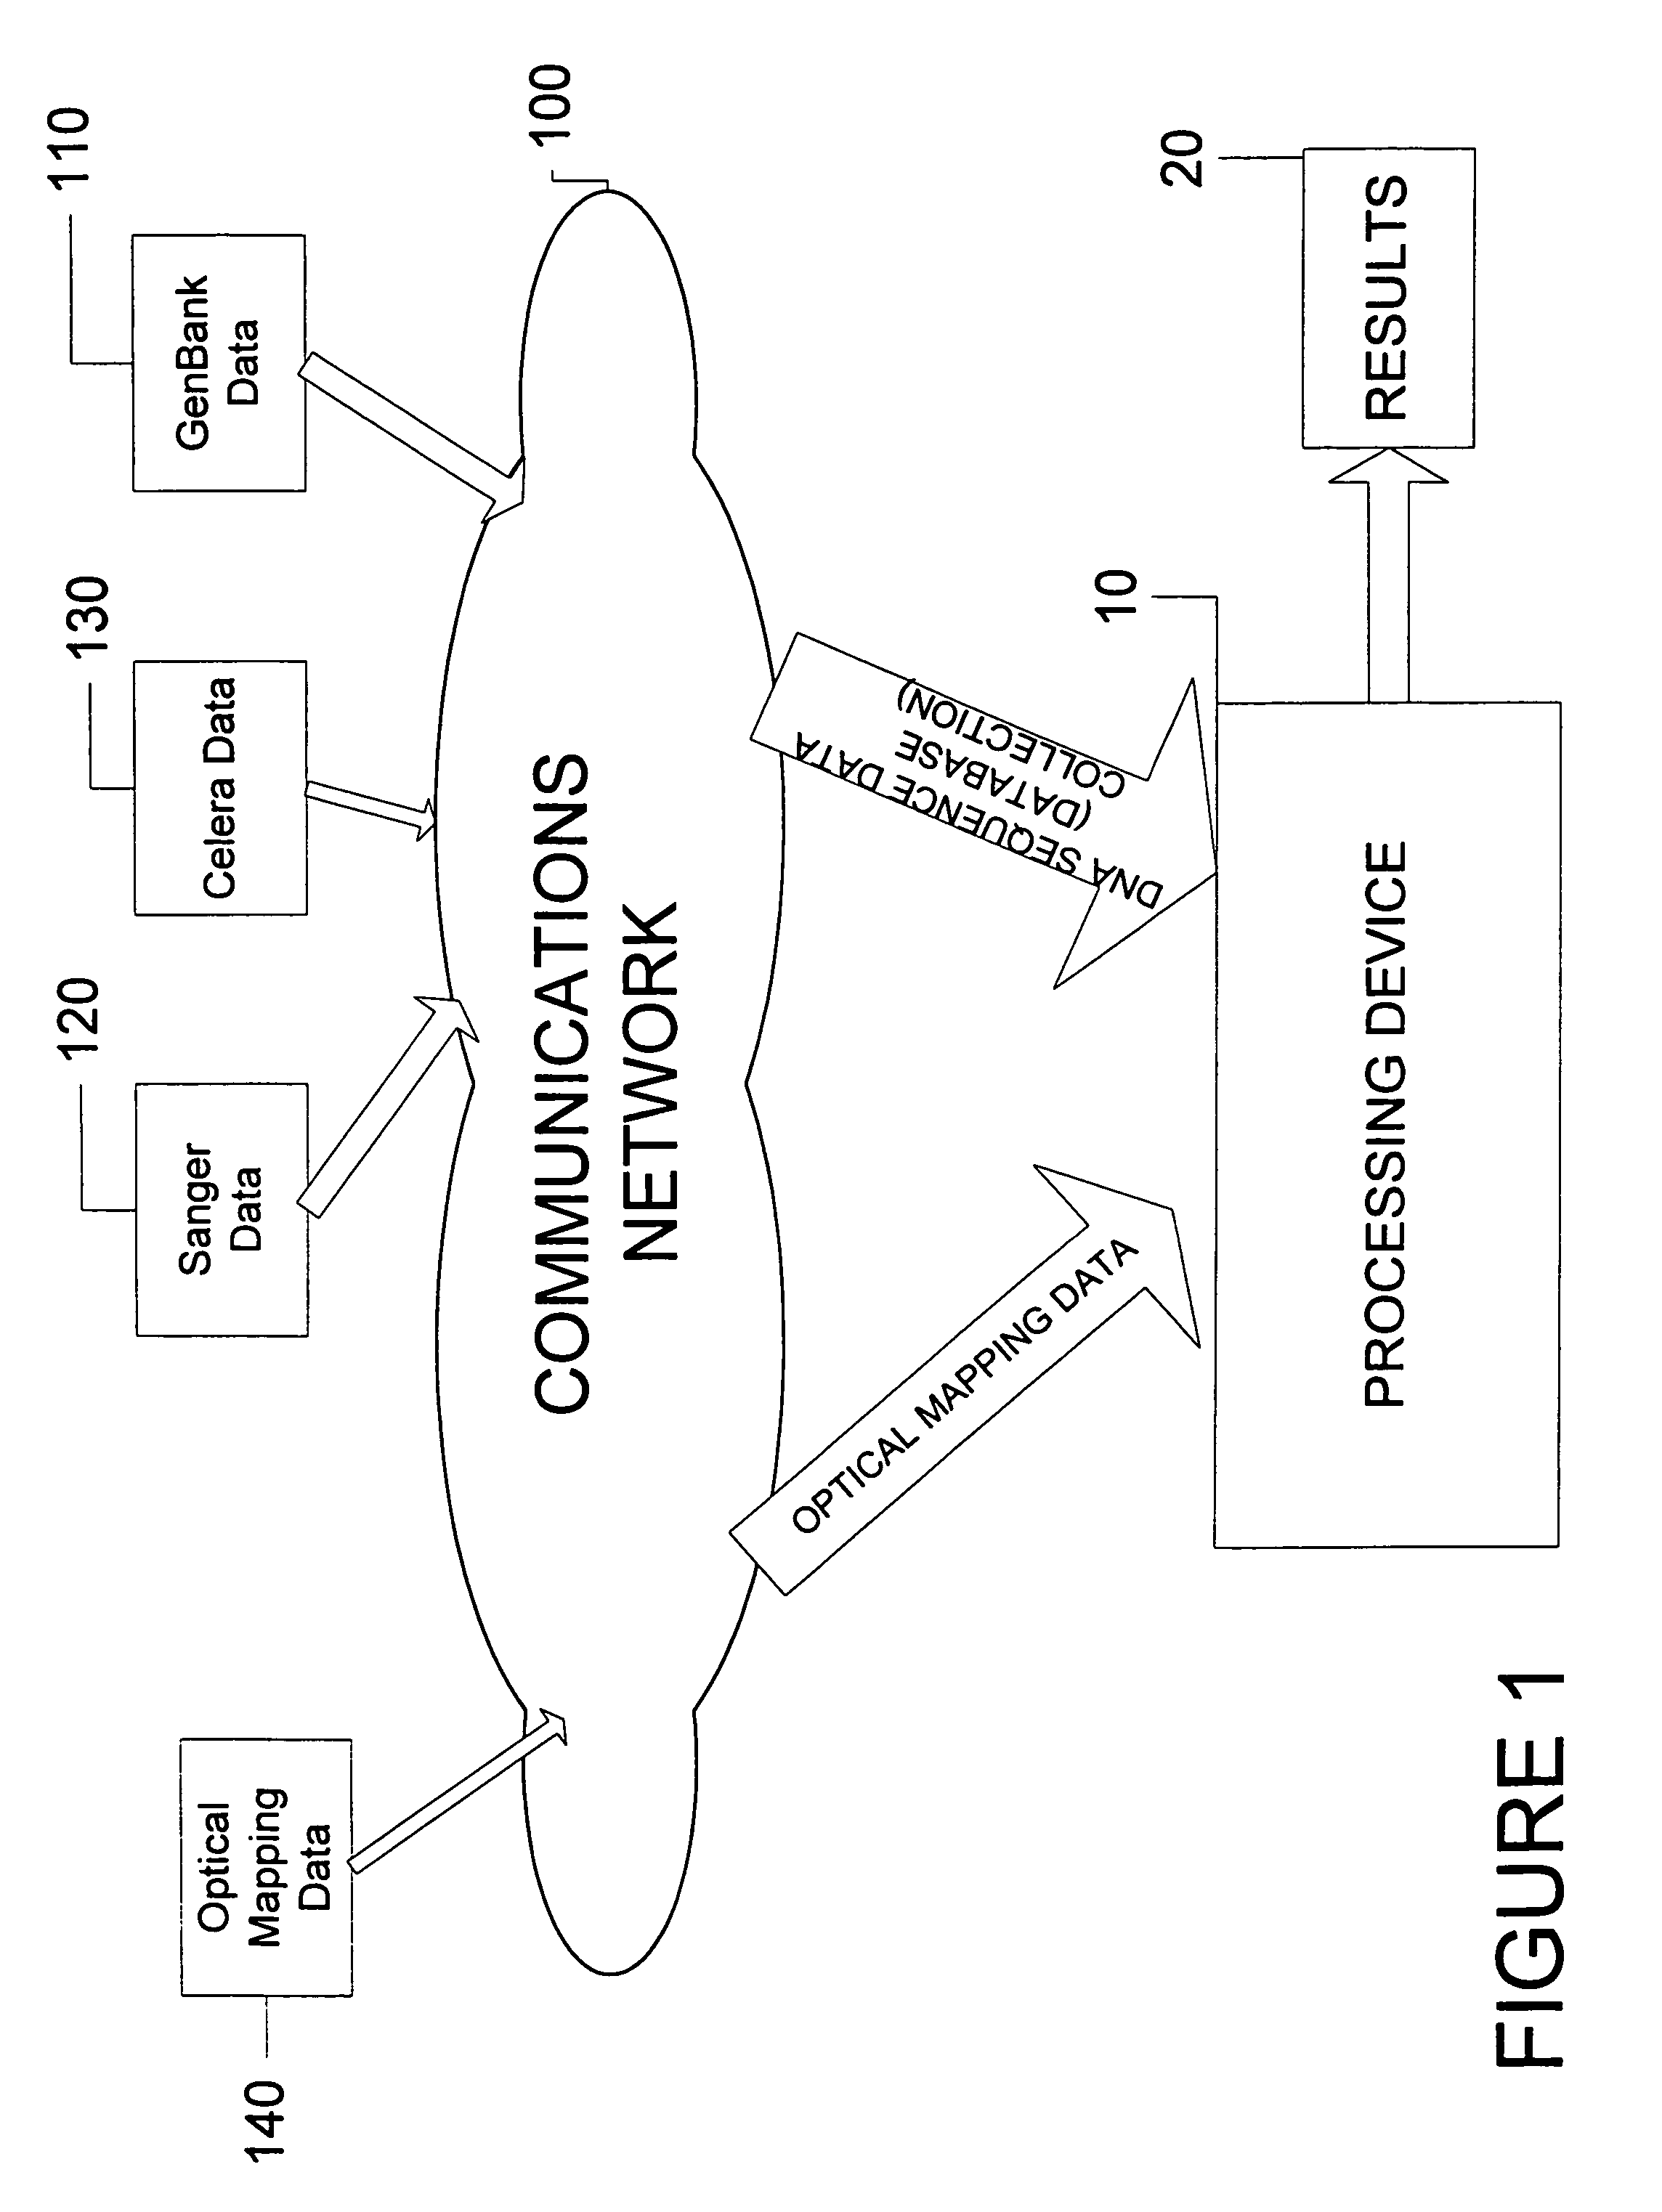 System and process for validating, aligning and reordering one or more genetic sequence maps using at least one ordered restriction map